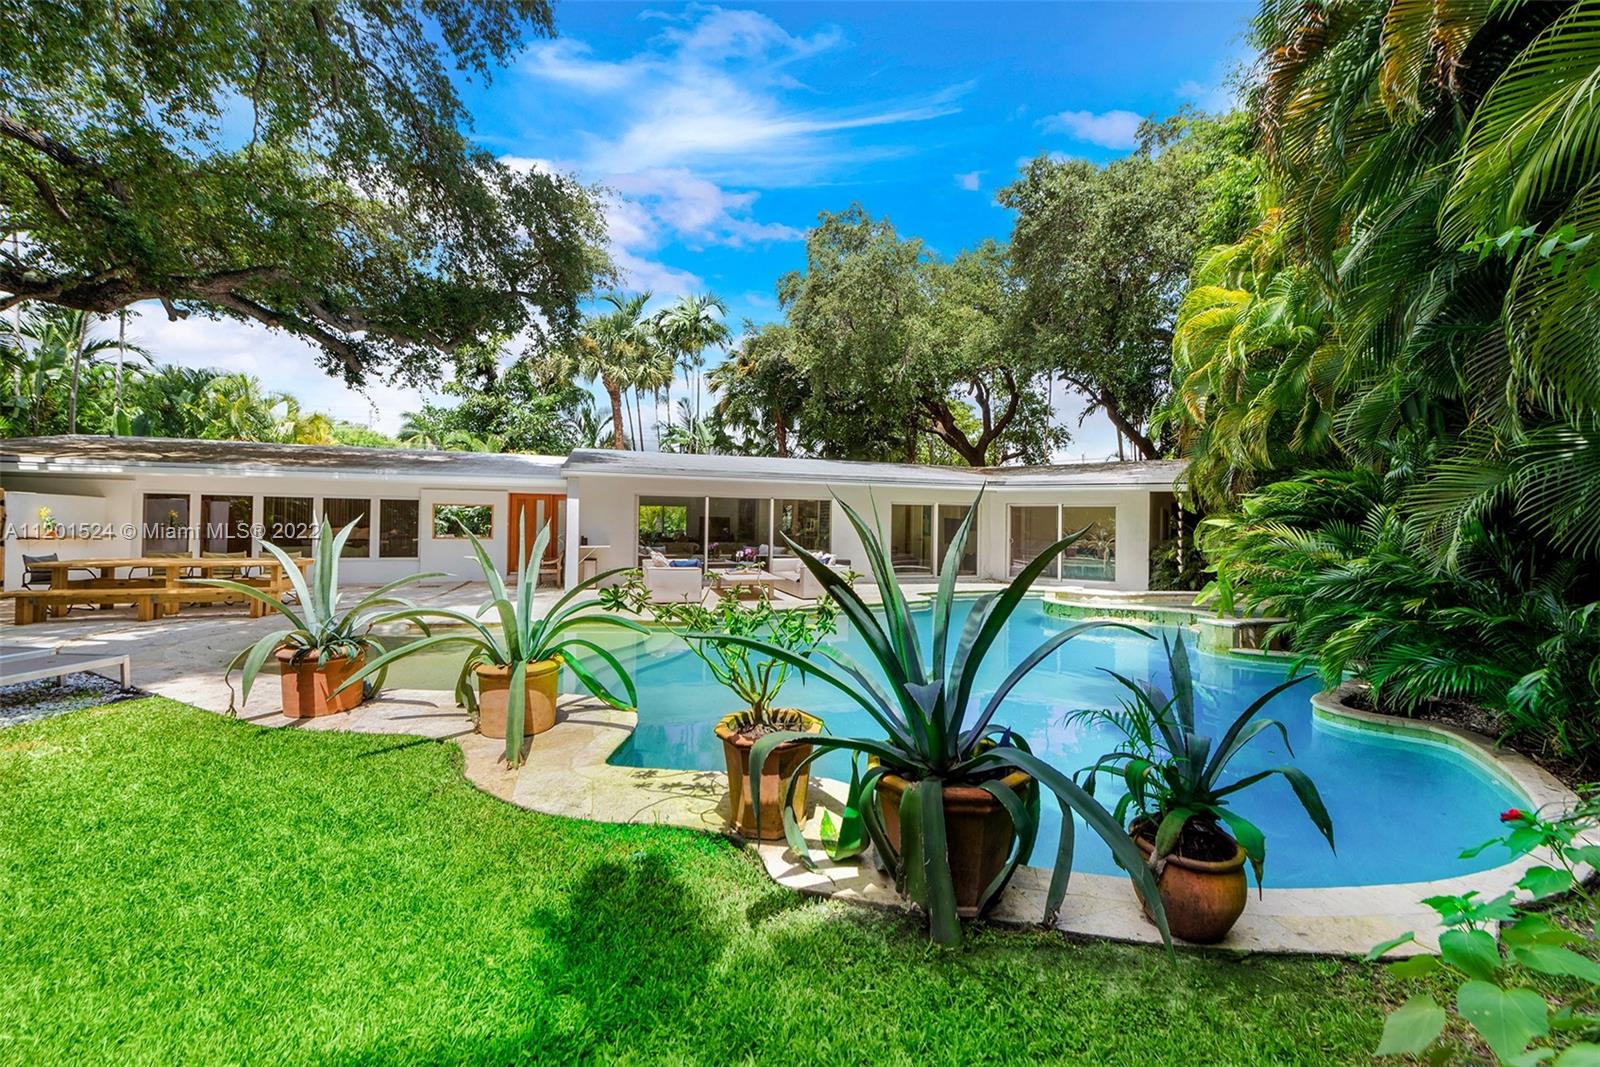 Beautifully updated, 2,464 SF, 4 bedroom, 3 bathroom, midcentury modern home in the most prestigious part of Miami Shores. This private, tropical, 12K+ SF lot sits under majestic oaks overlooking a heated, free-form pool with jacuzzi, and waterfall. The open floor plan features large rooms with floor-to-ceiling impact sliding doors throughout that exaggerate the lush greenery that surrounds the residence for a true indoor/outdoor living experience. Gourmet kitchen with quartz countertops and VIKING gas stove. The previous owners converted the 2 car garage into the new master wing with permits, it features luxurious walk-thru closet, custom dual sink vanity, oversized shower, and separate extra-large soaking tub with a view of your private tropical oasis! 2 A/C units Gas water heater!